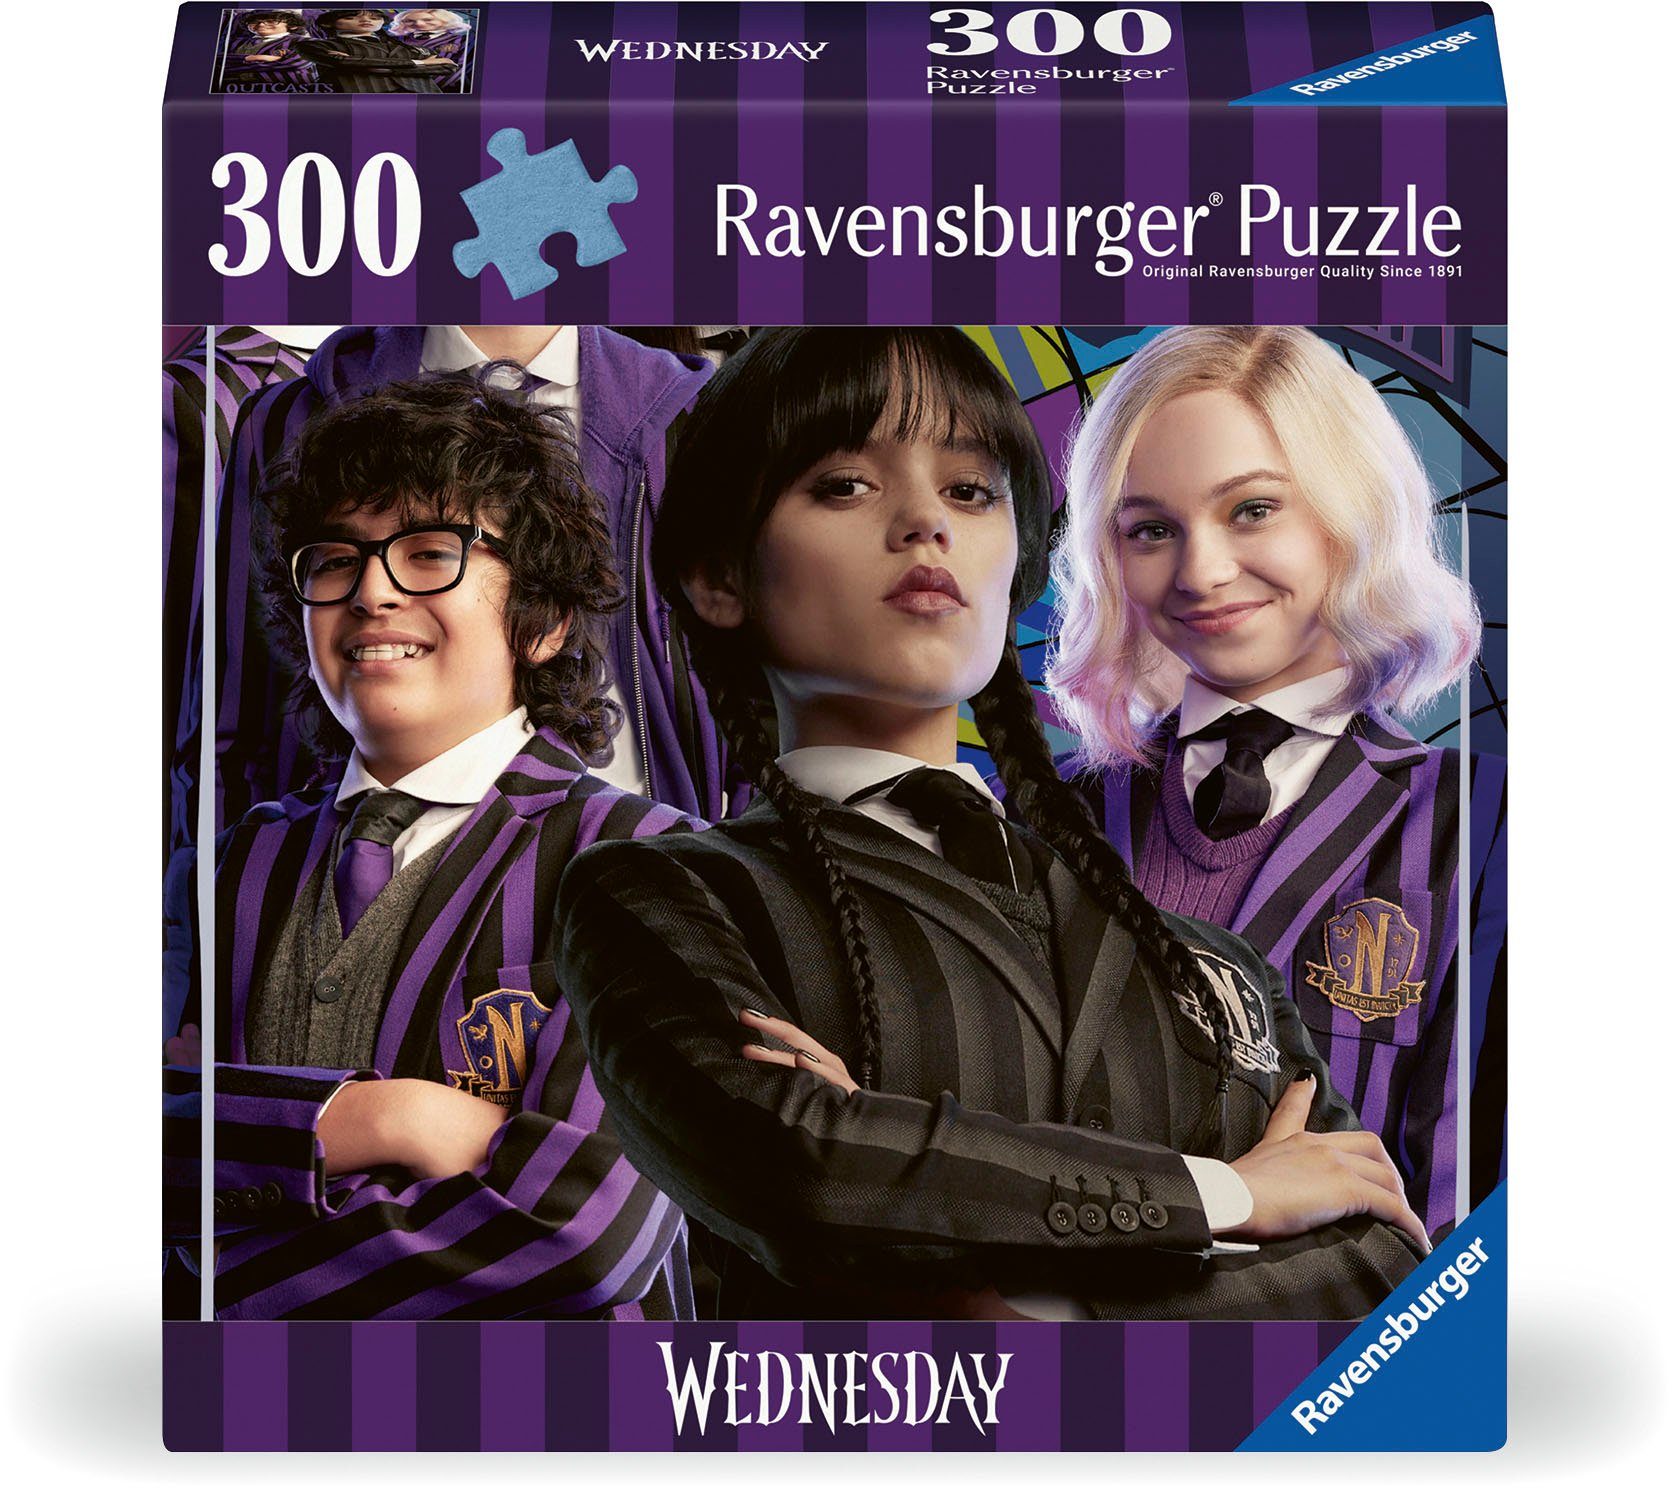 Standardmäßiges limitiertes Überseemodell! Ravensburger Puzzle Wednesday, Outcasts 300 Puzzleteile, Made in, are in Europe